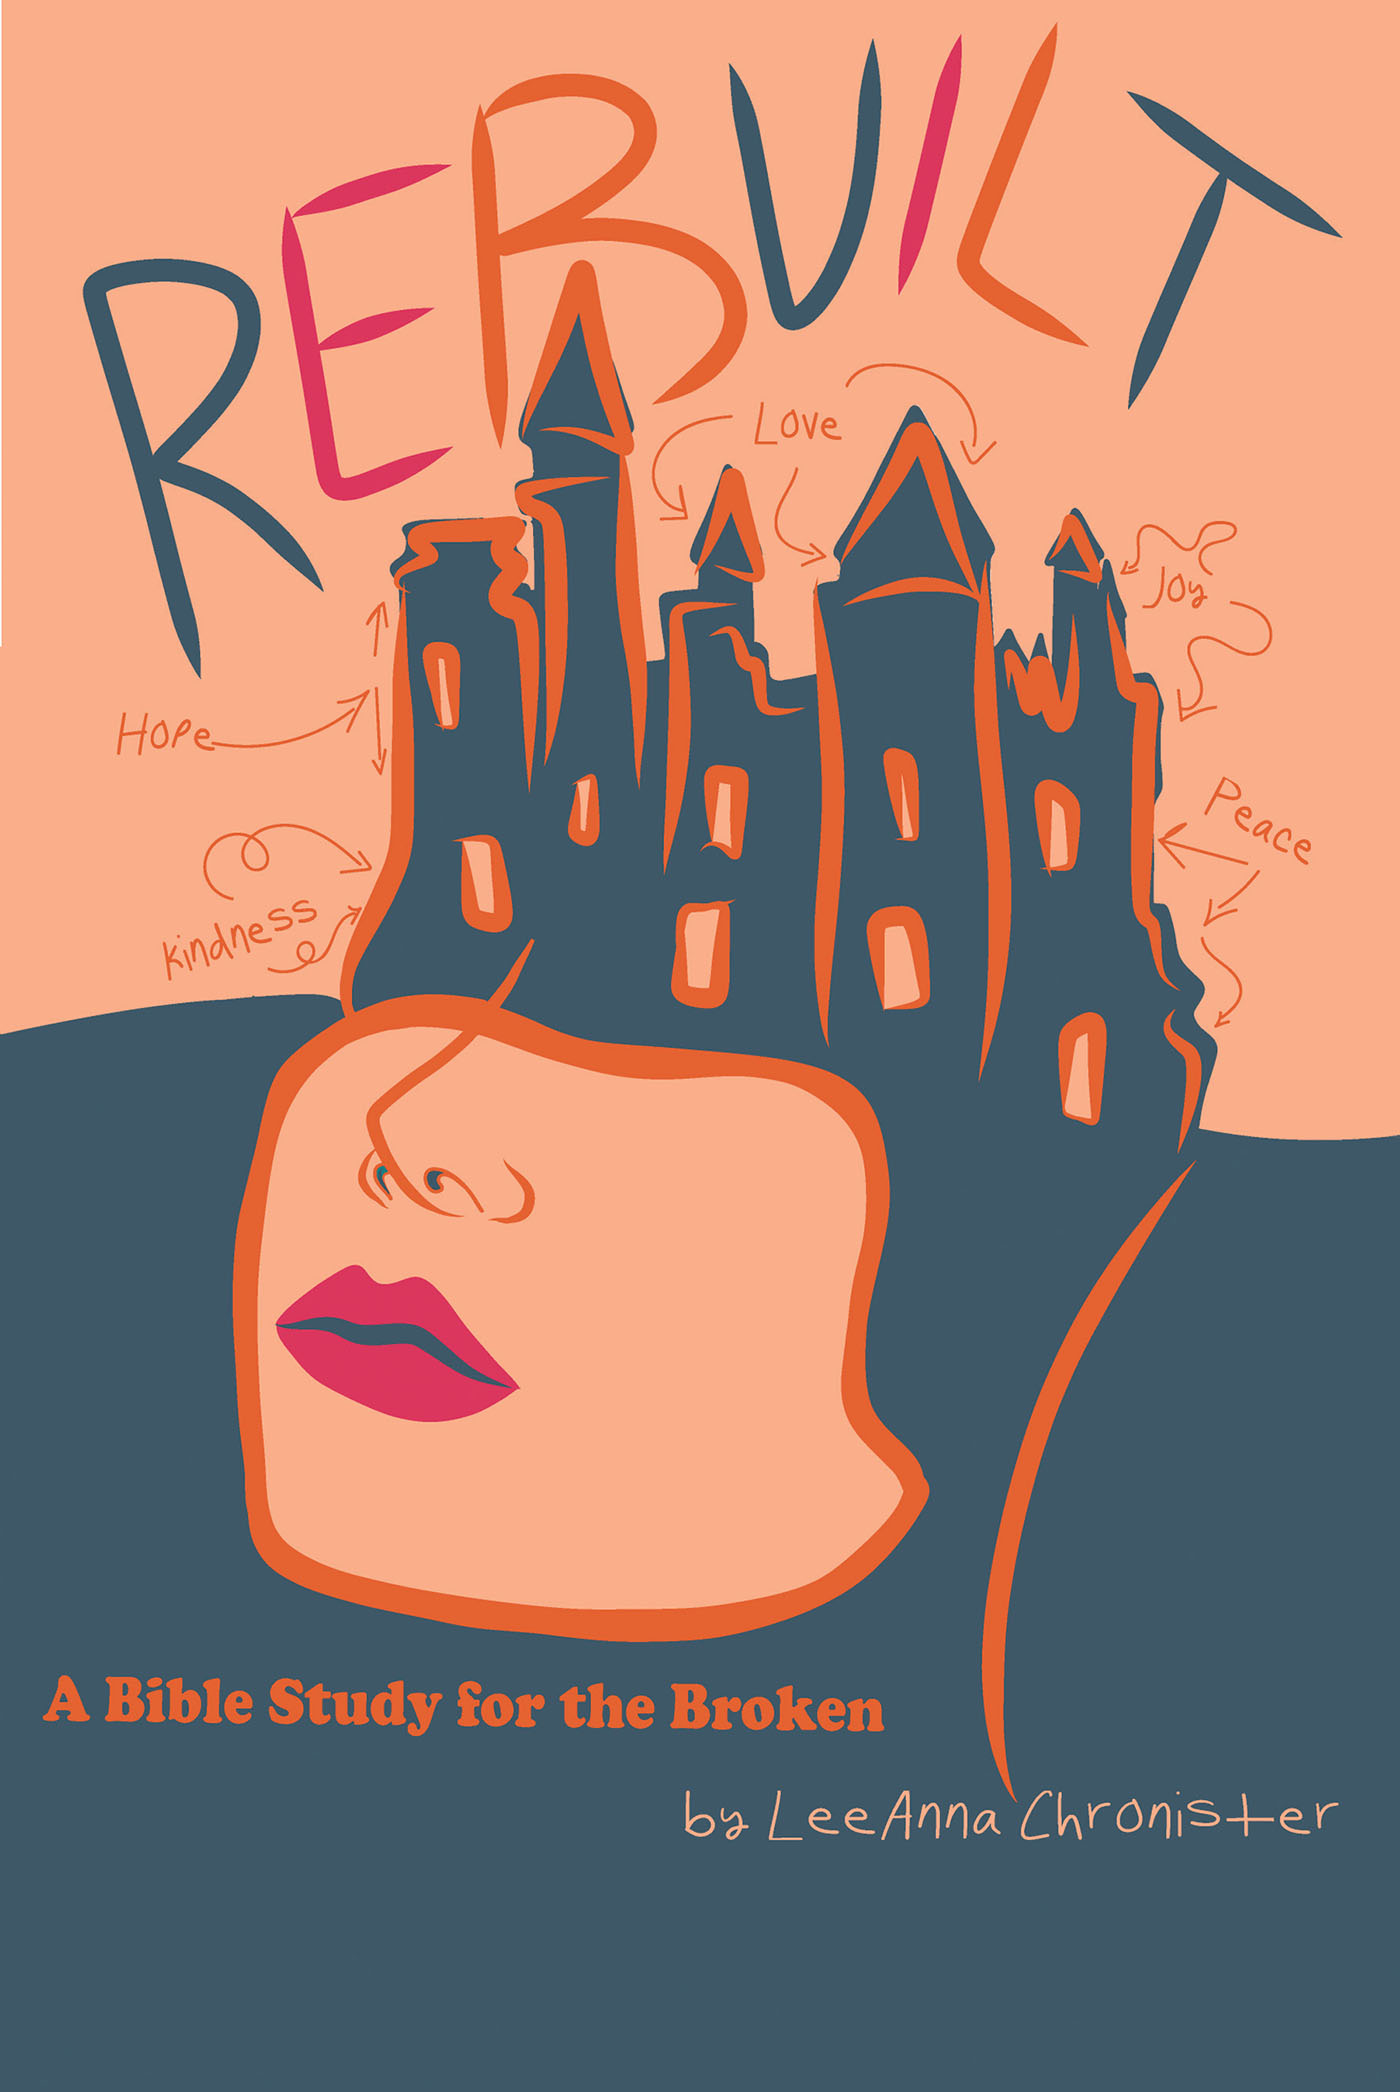 Leeanna Chronister’s Newly Released "Rebuilt: A Bible Study for the Broken" is a Helpful Resource for Anyone Seeking a Path to Healing and Growth